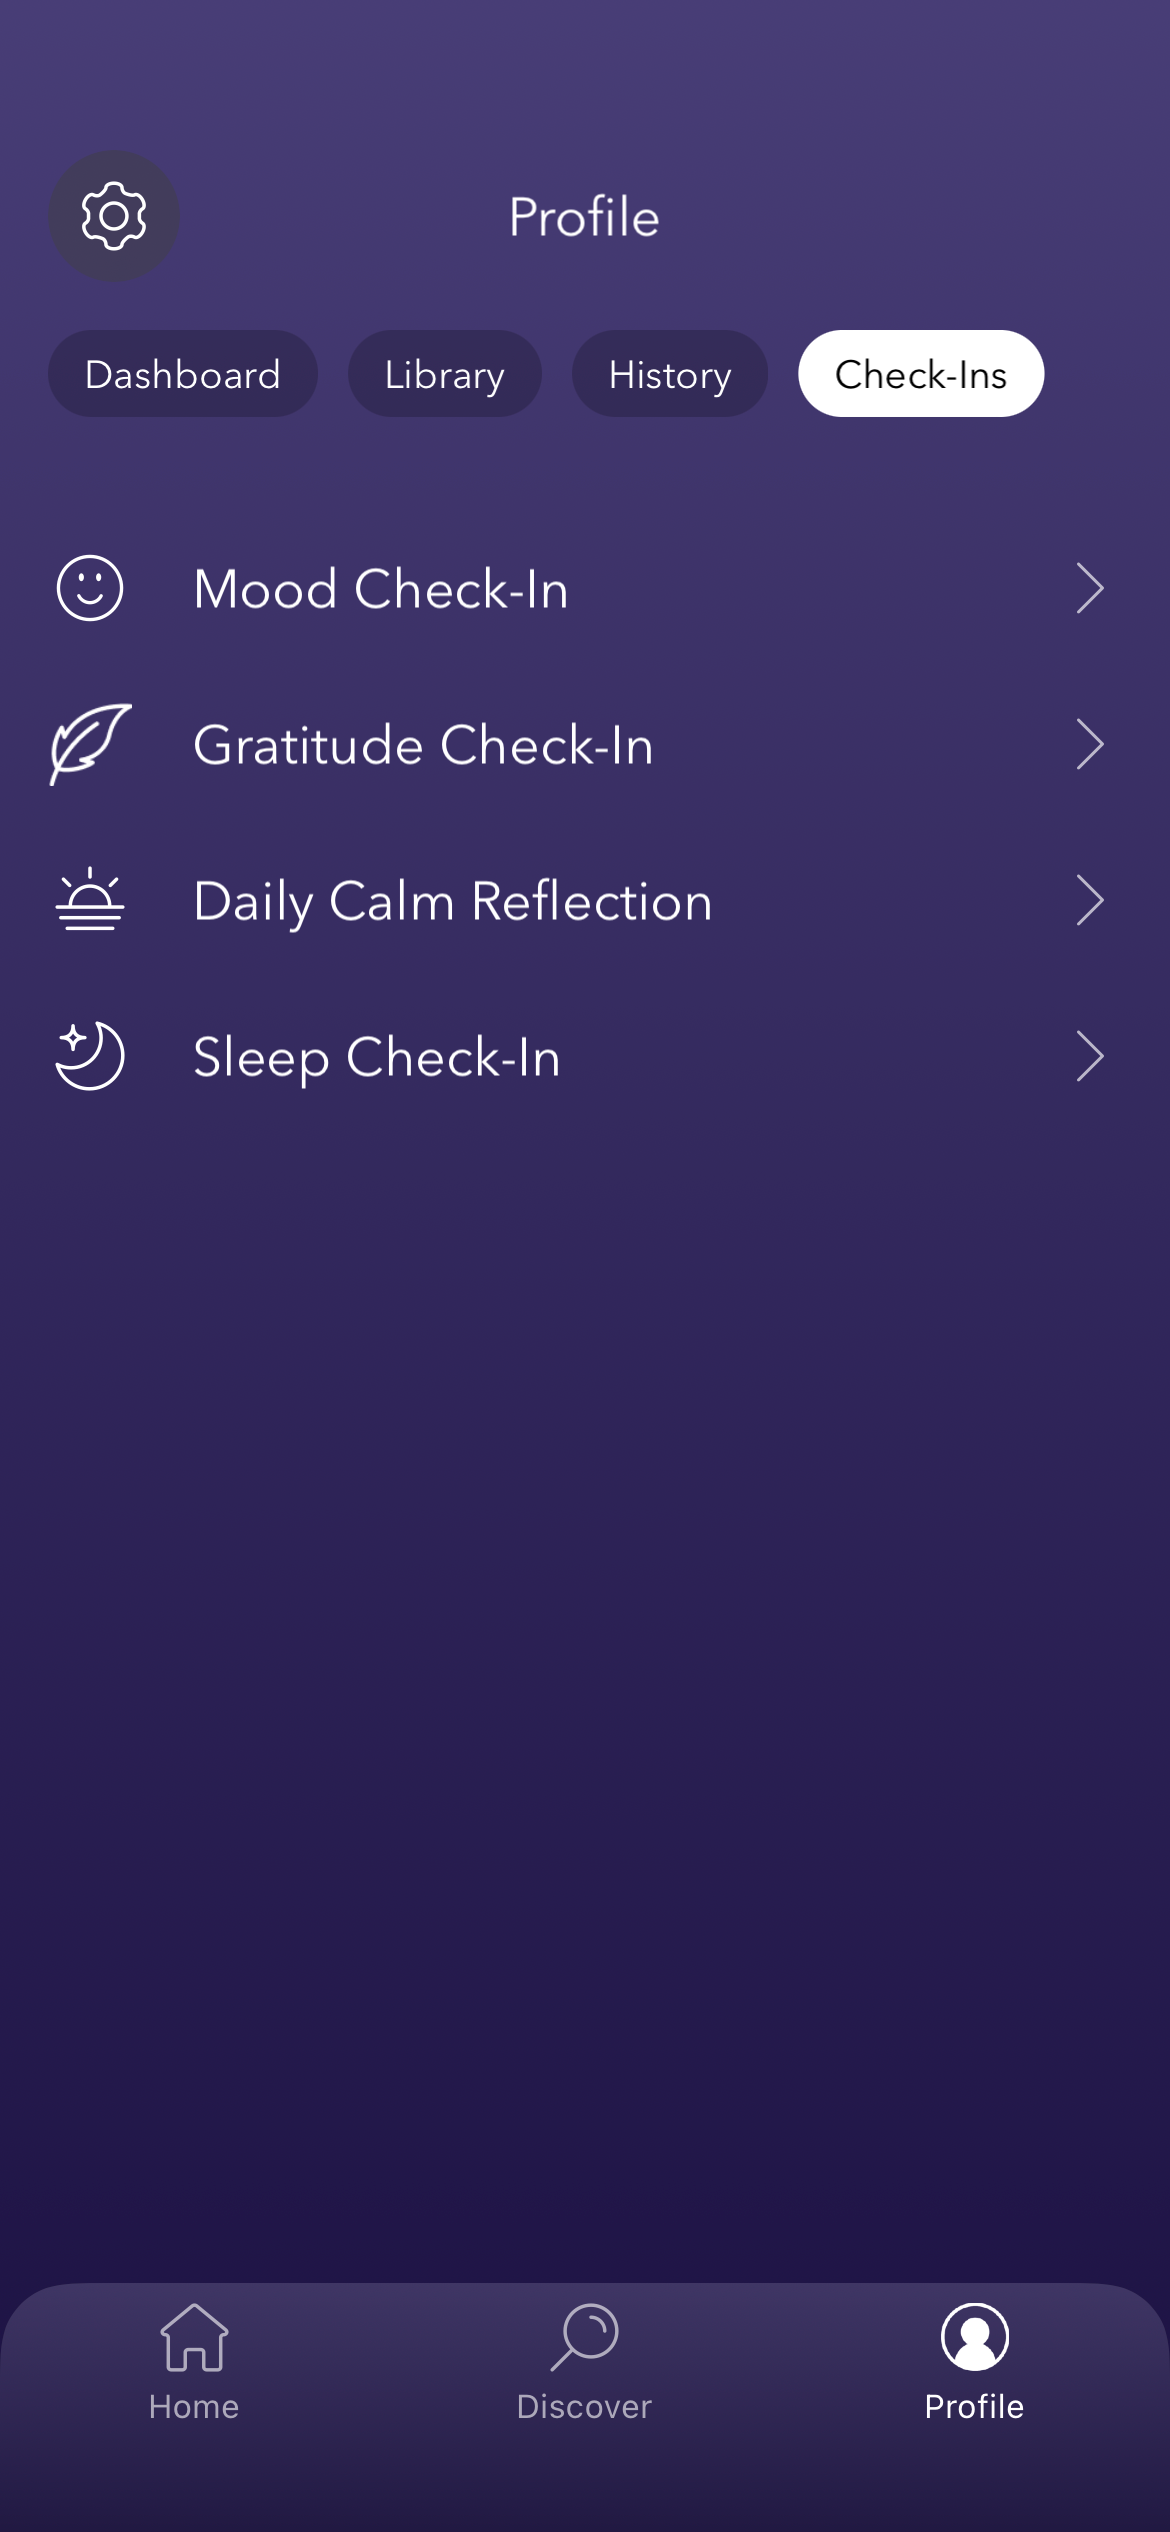 Mood Check-In in Calm